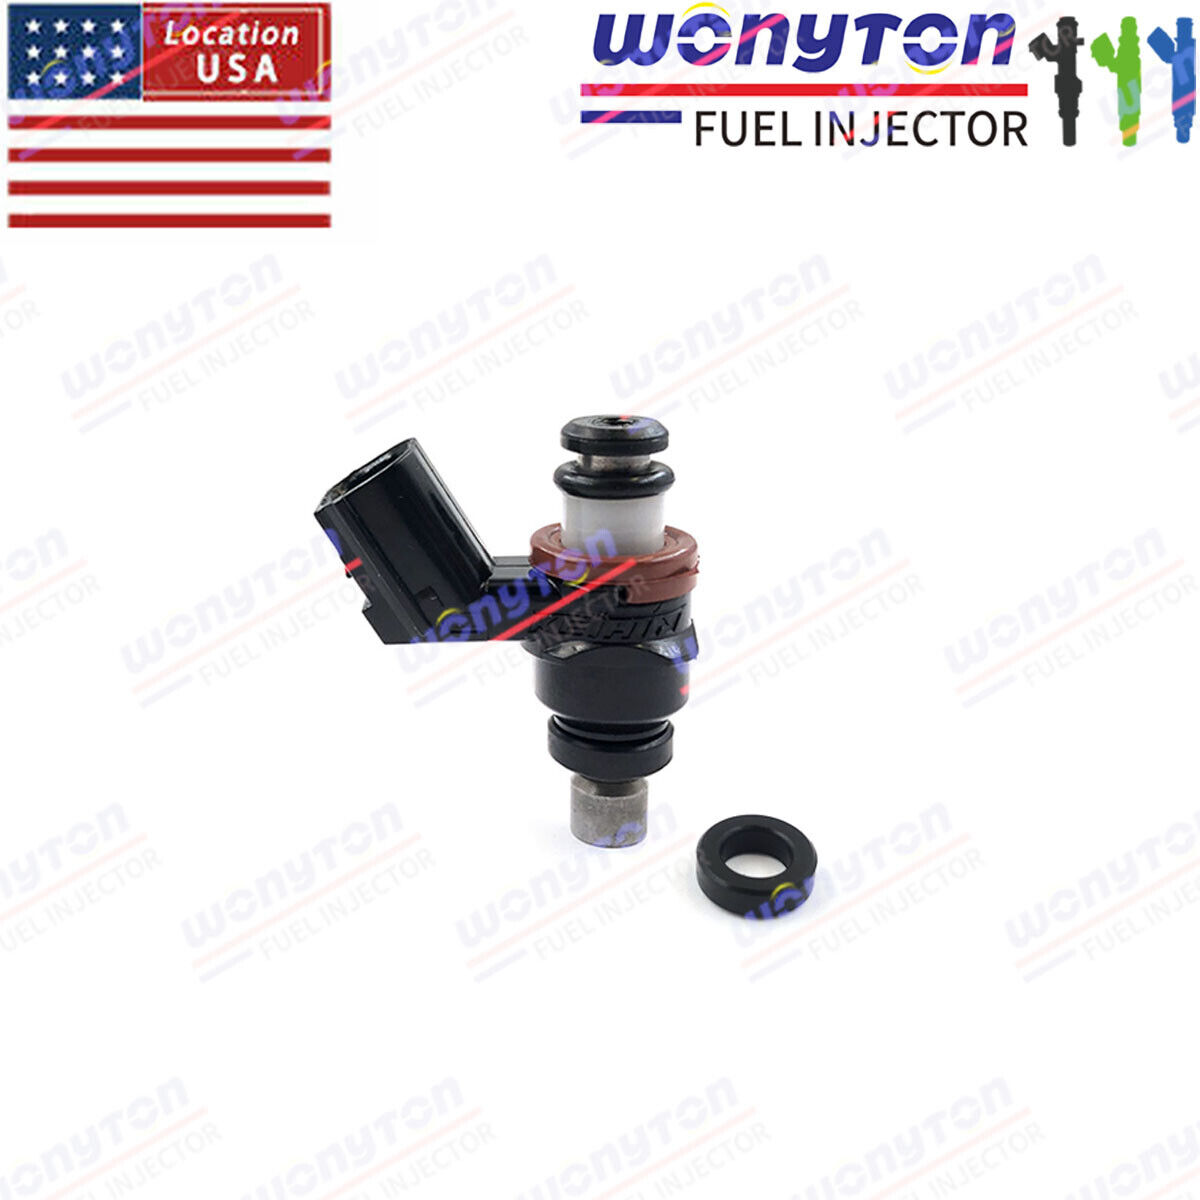 1X Genuine Fuel Injector For Honda SXS1000 PIONEER1000 M3 M5 15-21